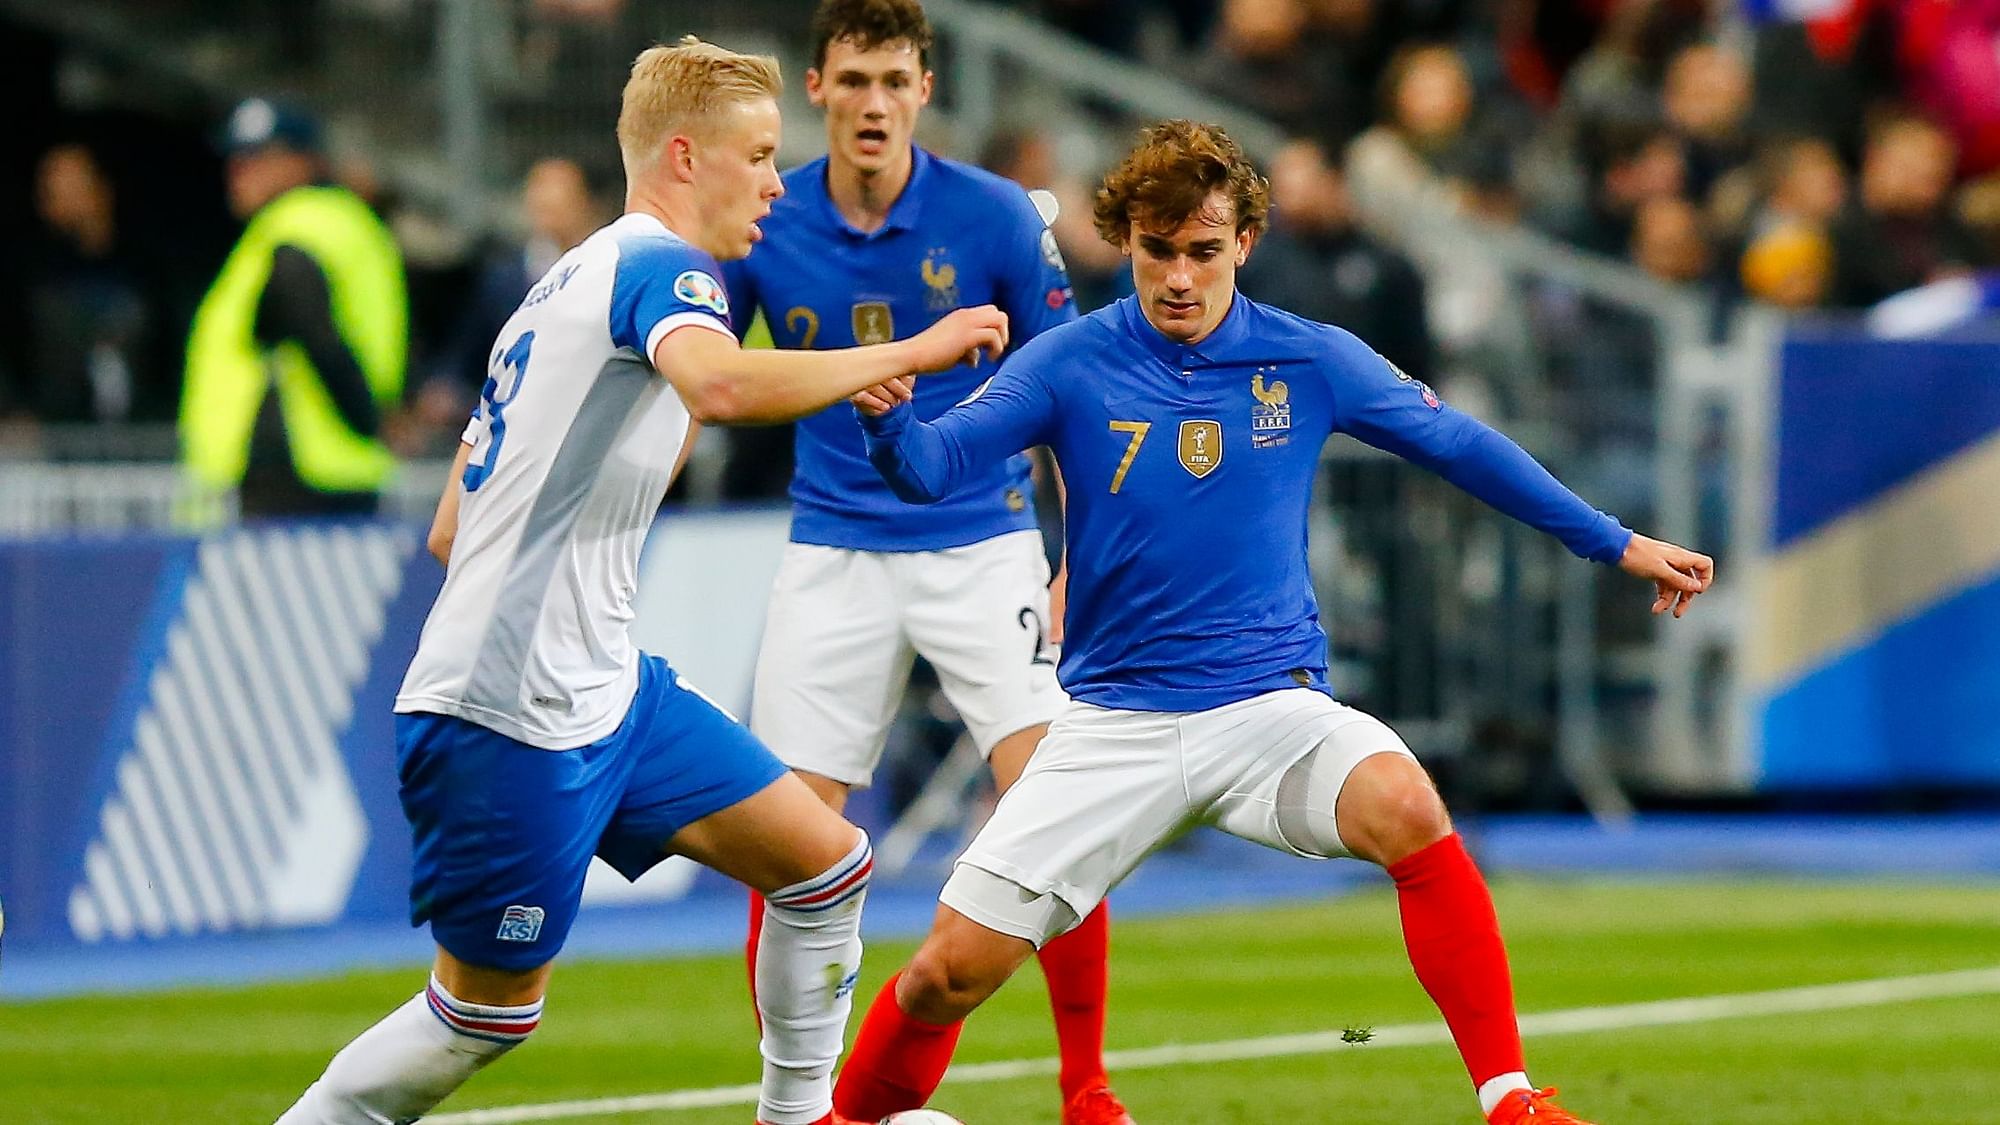 France’s Antoine Griezmann, right, challenges for the ball with Iceland’s Hordur Magnusson during the Euro 2020 group H qualifying soccer match between France and Iceland at Stade de France stadium in Saint Denis on Monday, 25 March.